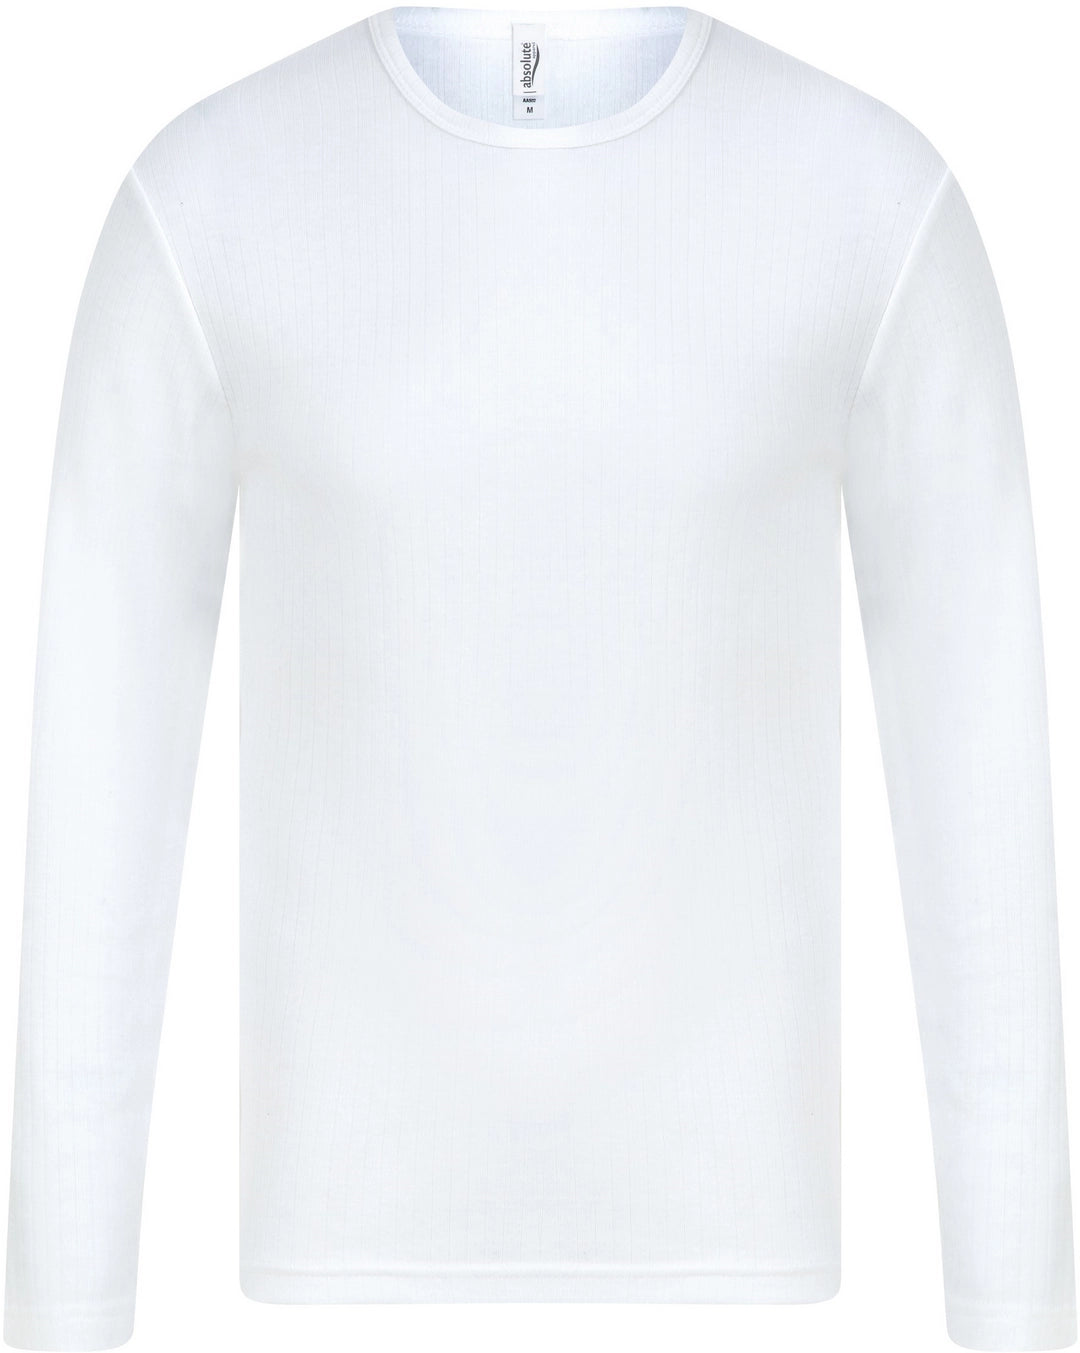 Absolute Apparel AA502 Adult Thermal Long Sleeve T-Shirt - COOZO